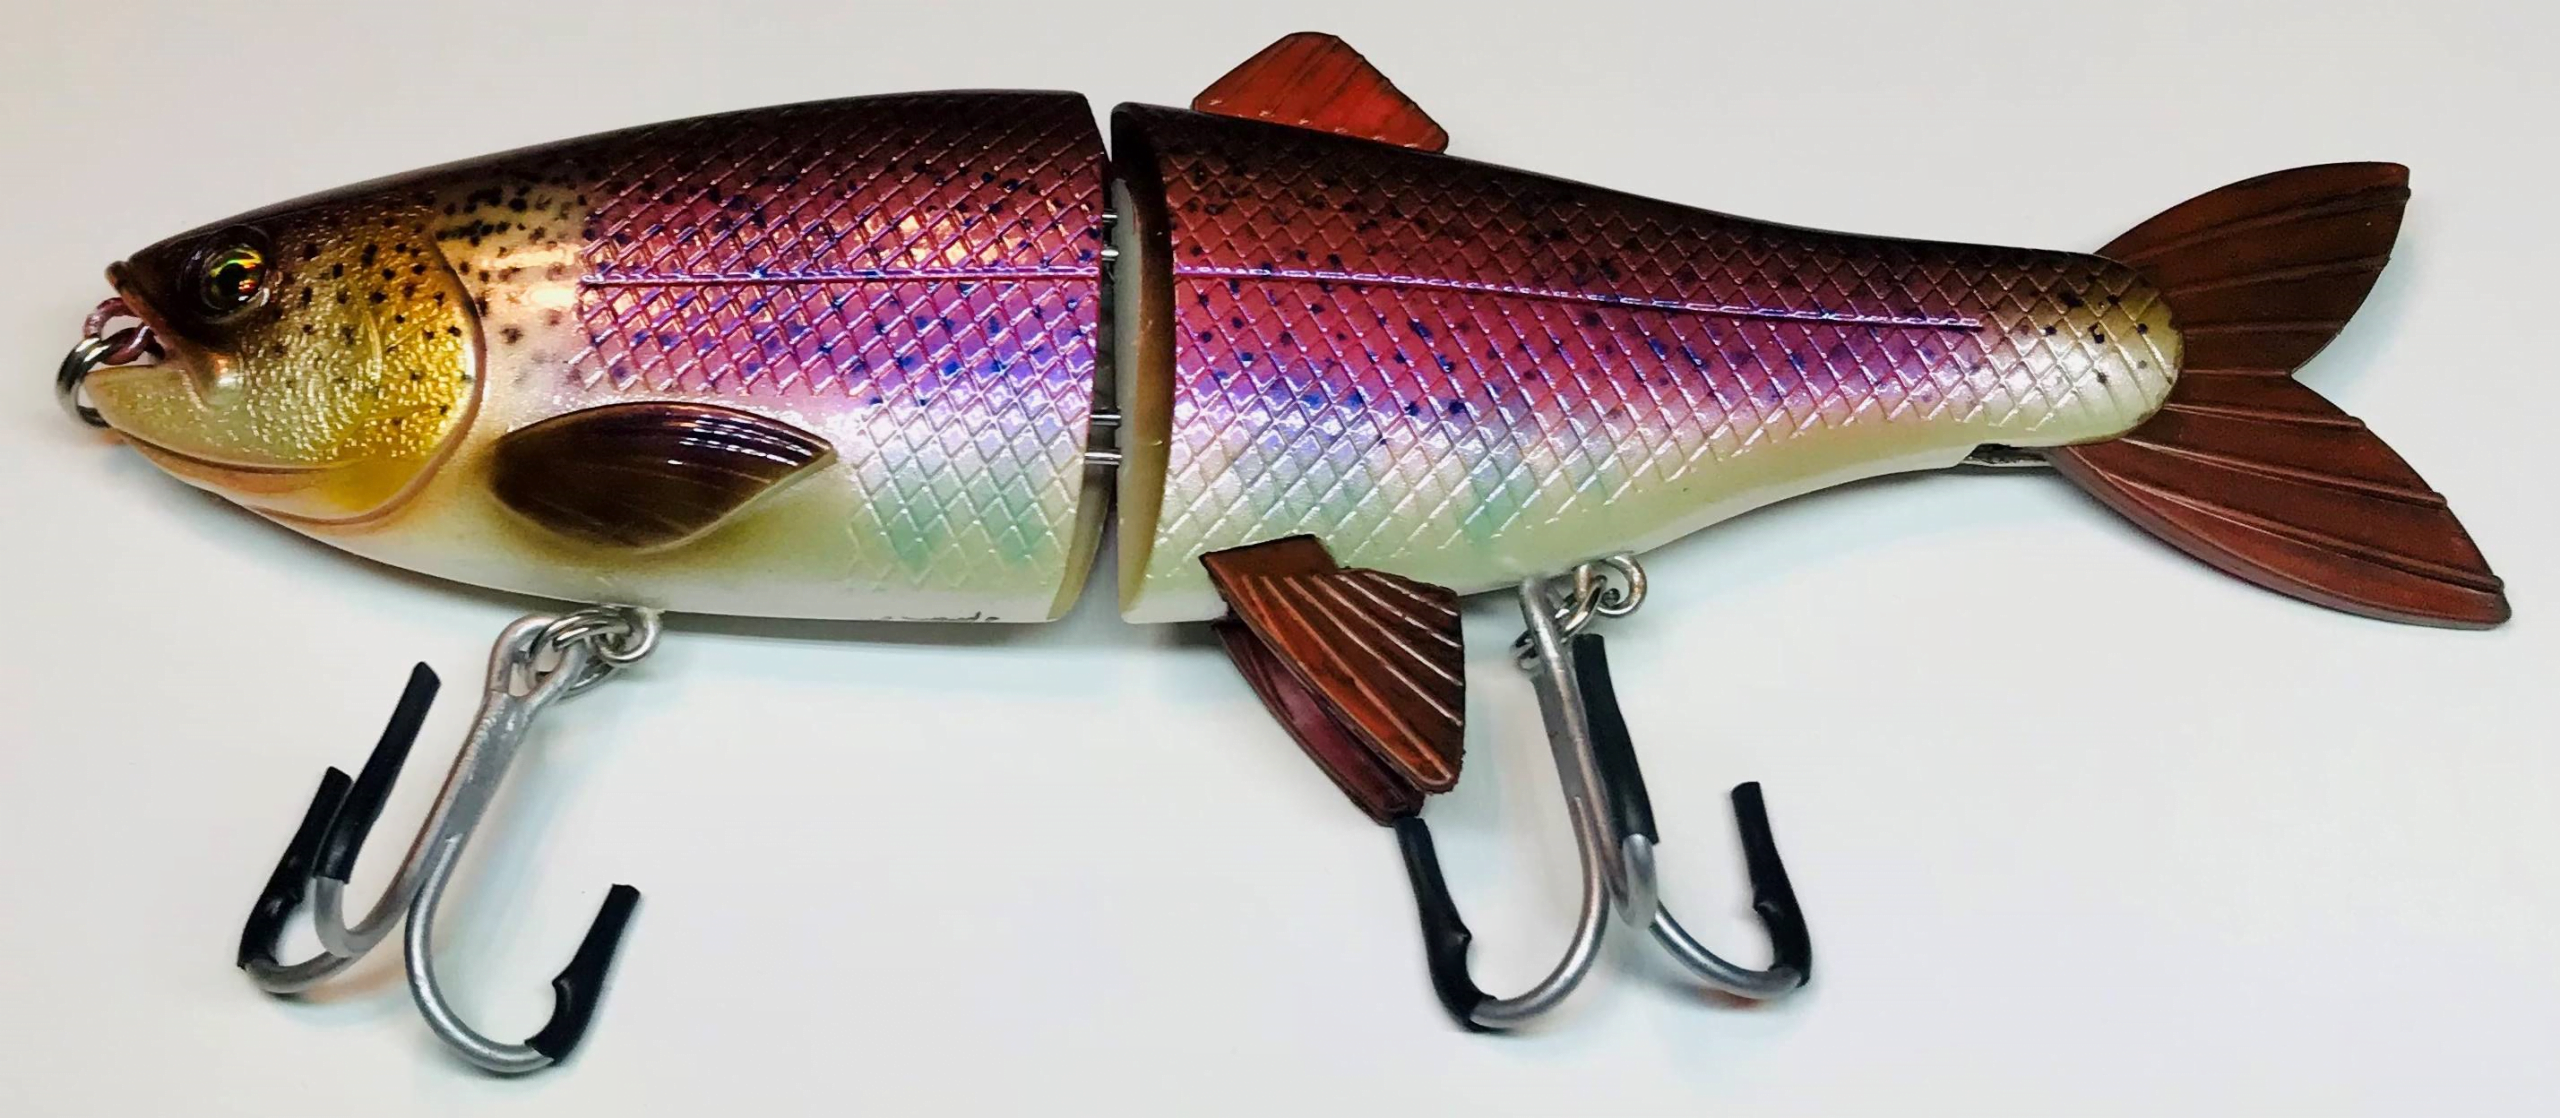 STRIPER MAGIC RAINBOW TROUT - HAND CRAFTED STRIPER LURES